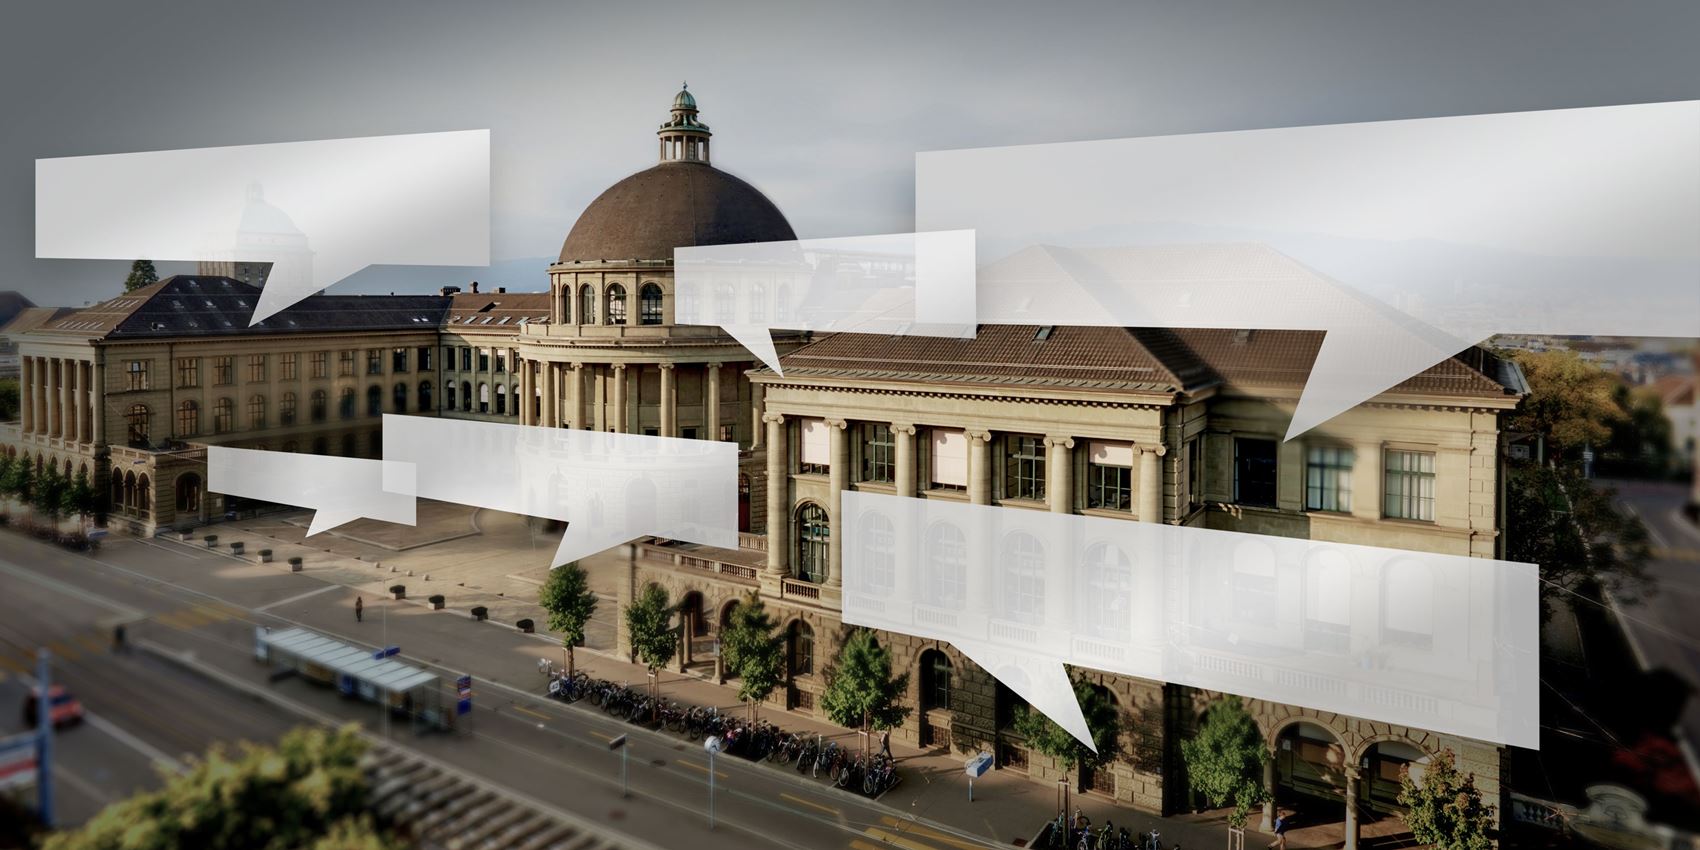 Ideas and opinions from throughout ETH: the Zukunftsblog is opening up to include all socially relevant topics from the university. (Image: ETH Zurich)